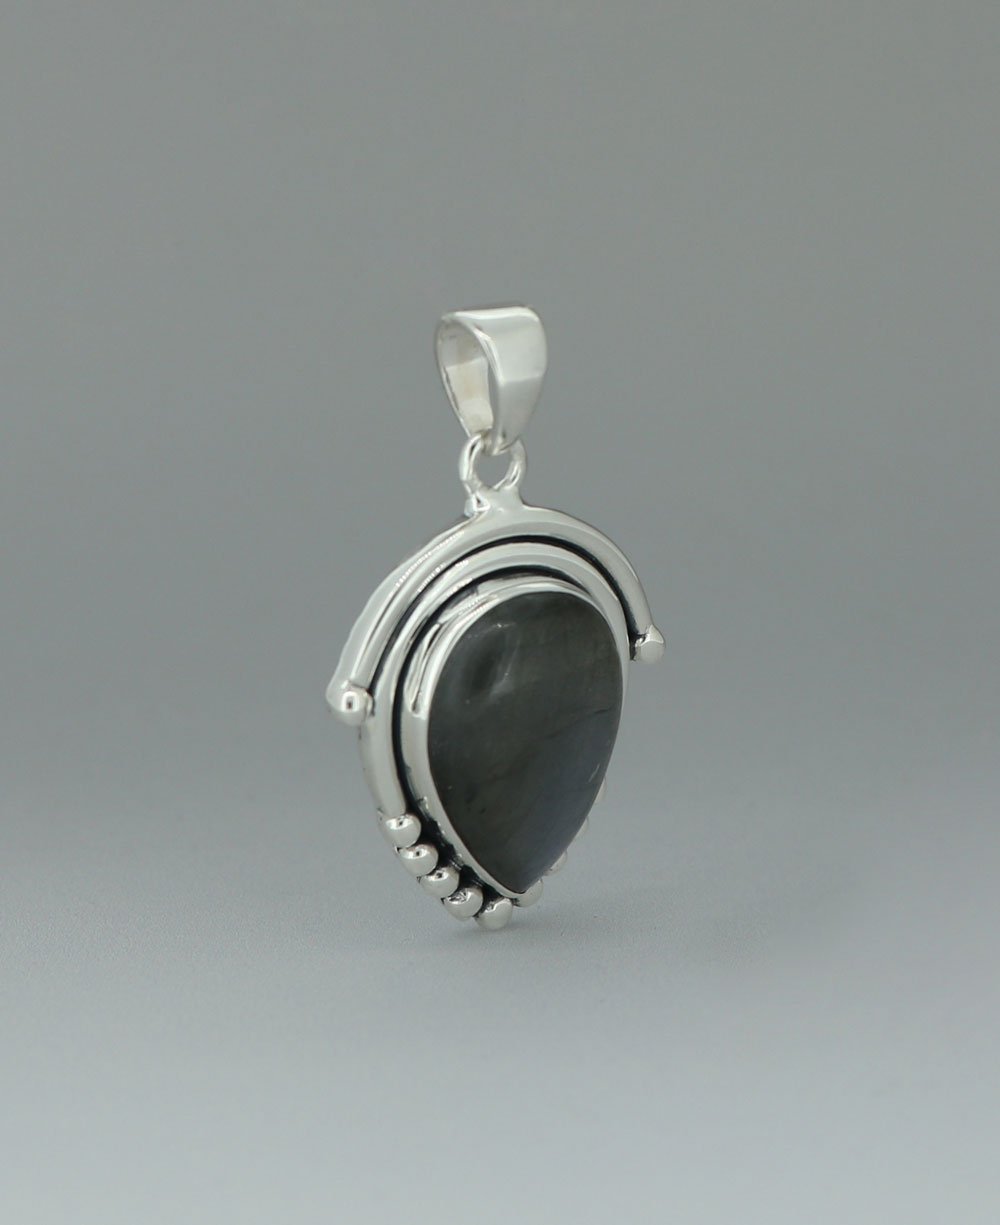 Premium Labradorite Inverted Teardrop Silver Pendant with Beaded Architectural Detailing - Charms & Pendants